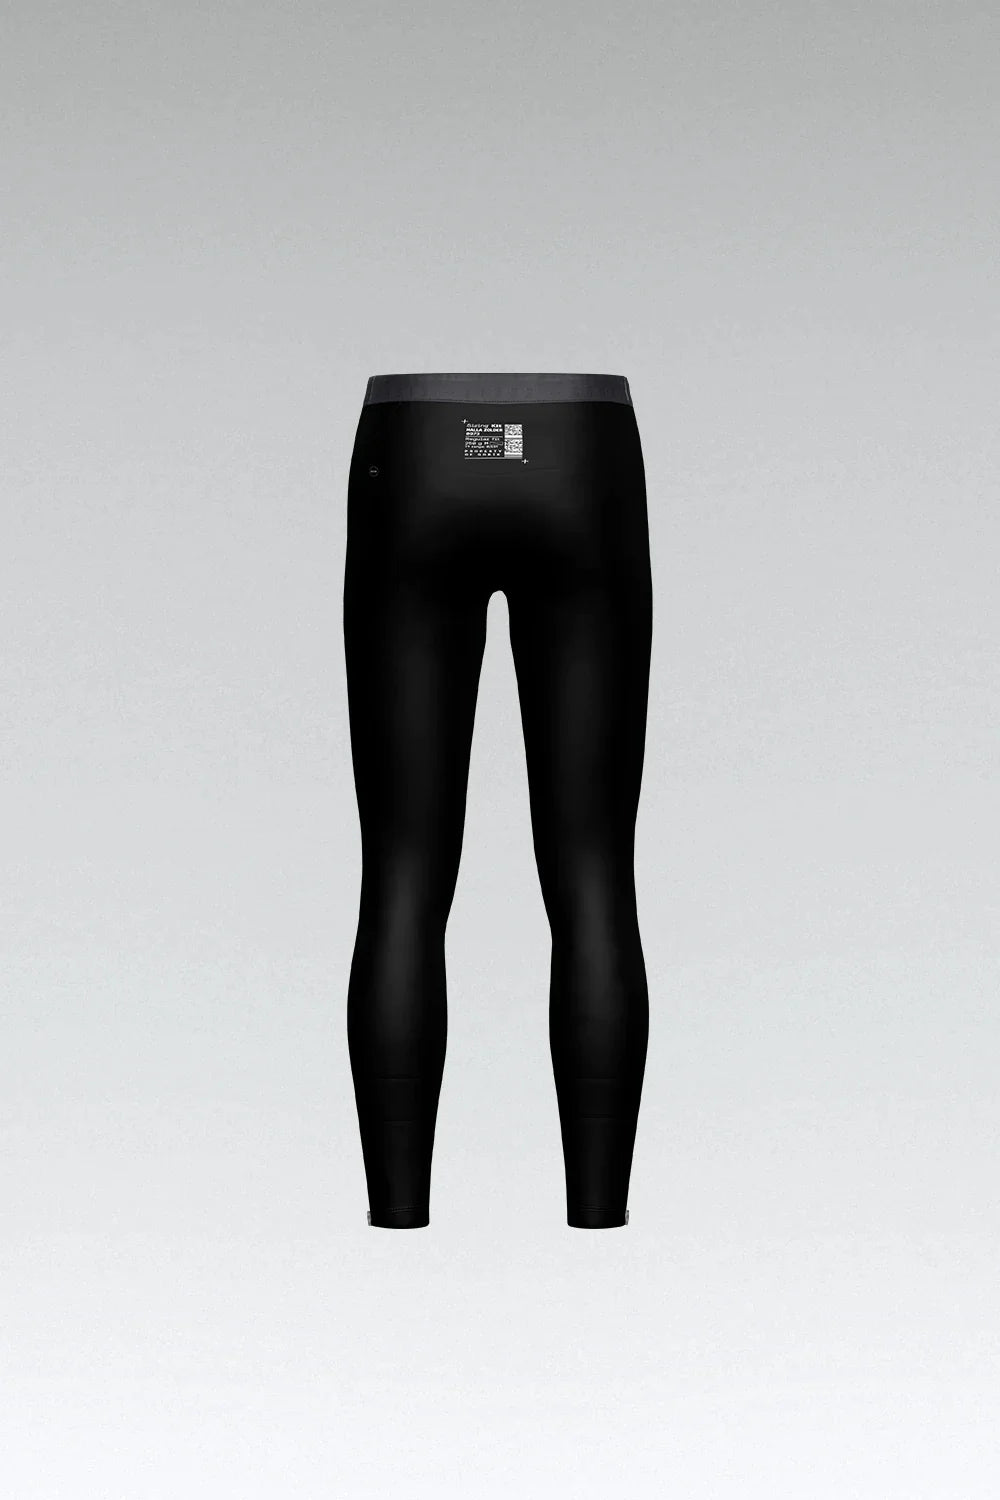 Lululemon Zoned In Tight | Men's Running Tights 2019 | Courtesy of The Muck  Boot Company